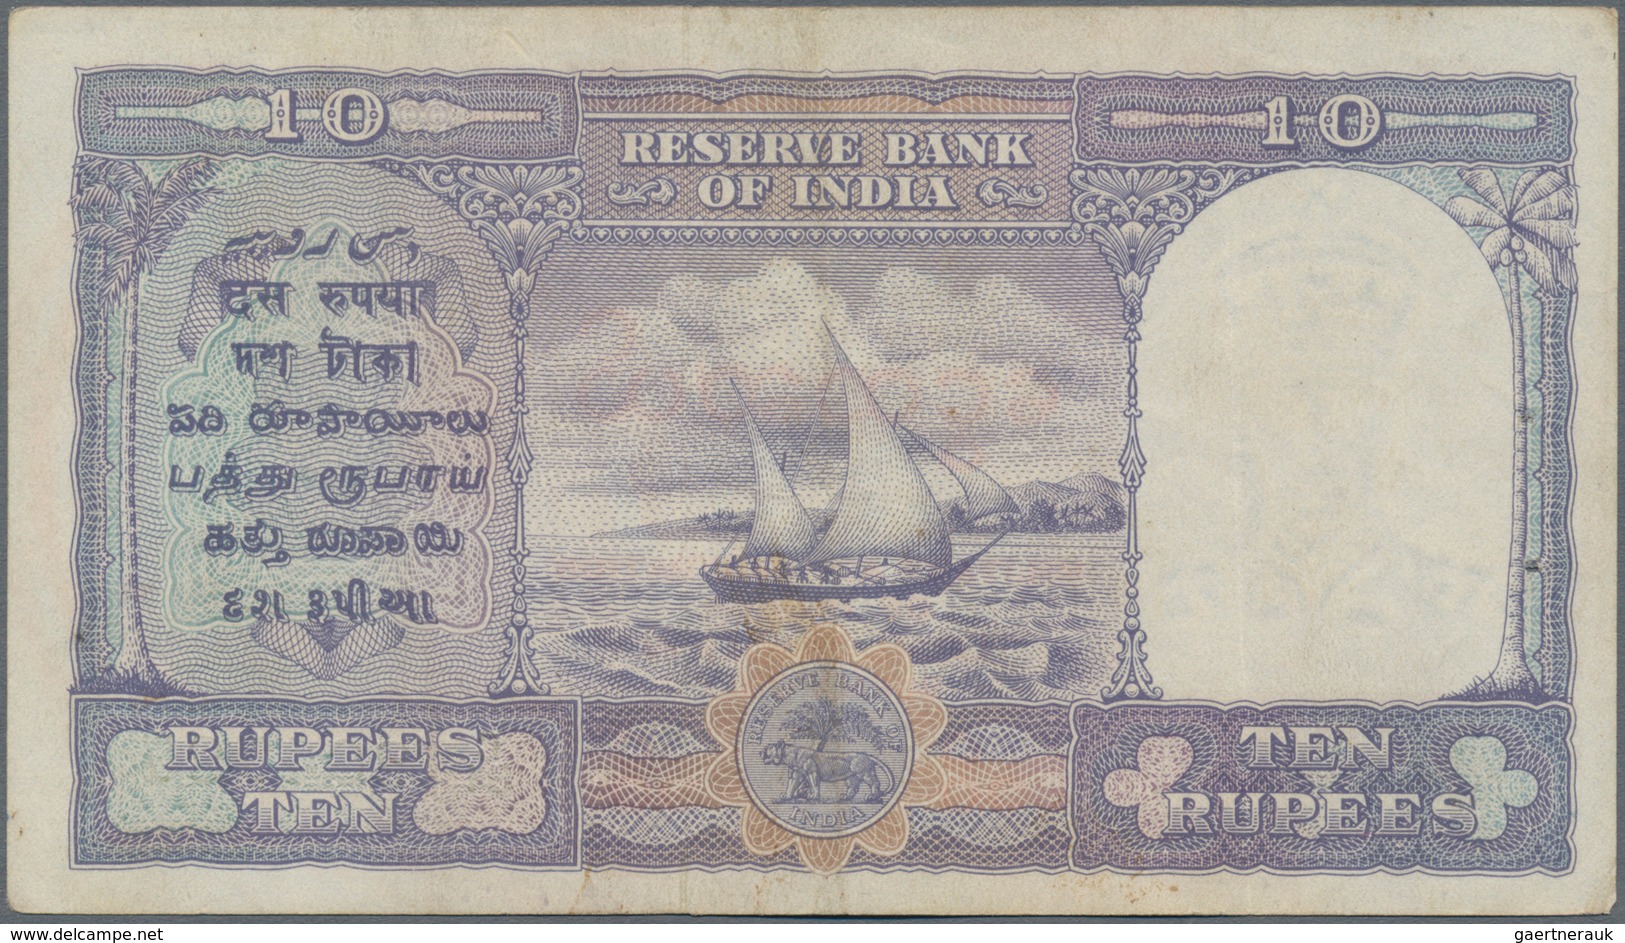 Burma / Myanmar / Birma: Lot with 4 banknotes 1, 5, 10 and 100 Rupees ND(1945), all with overprint “